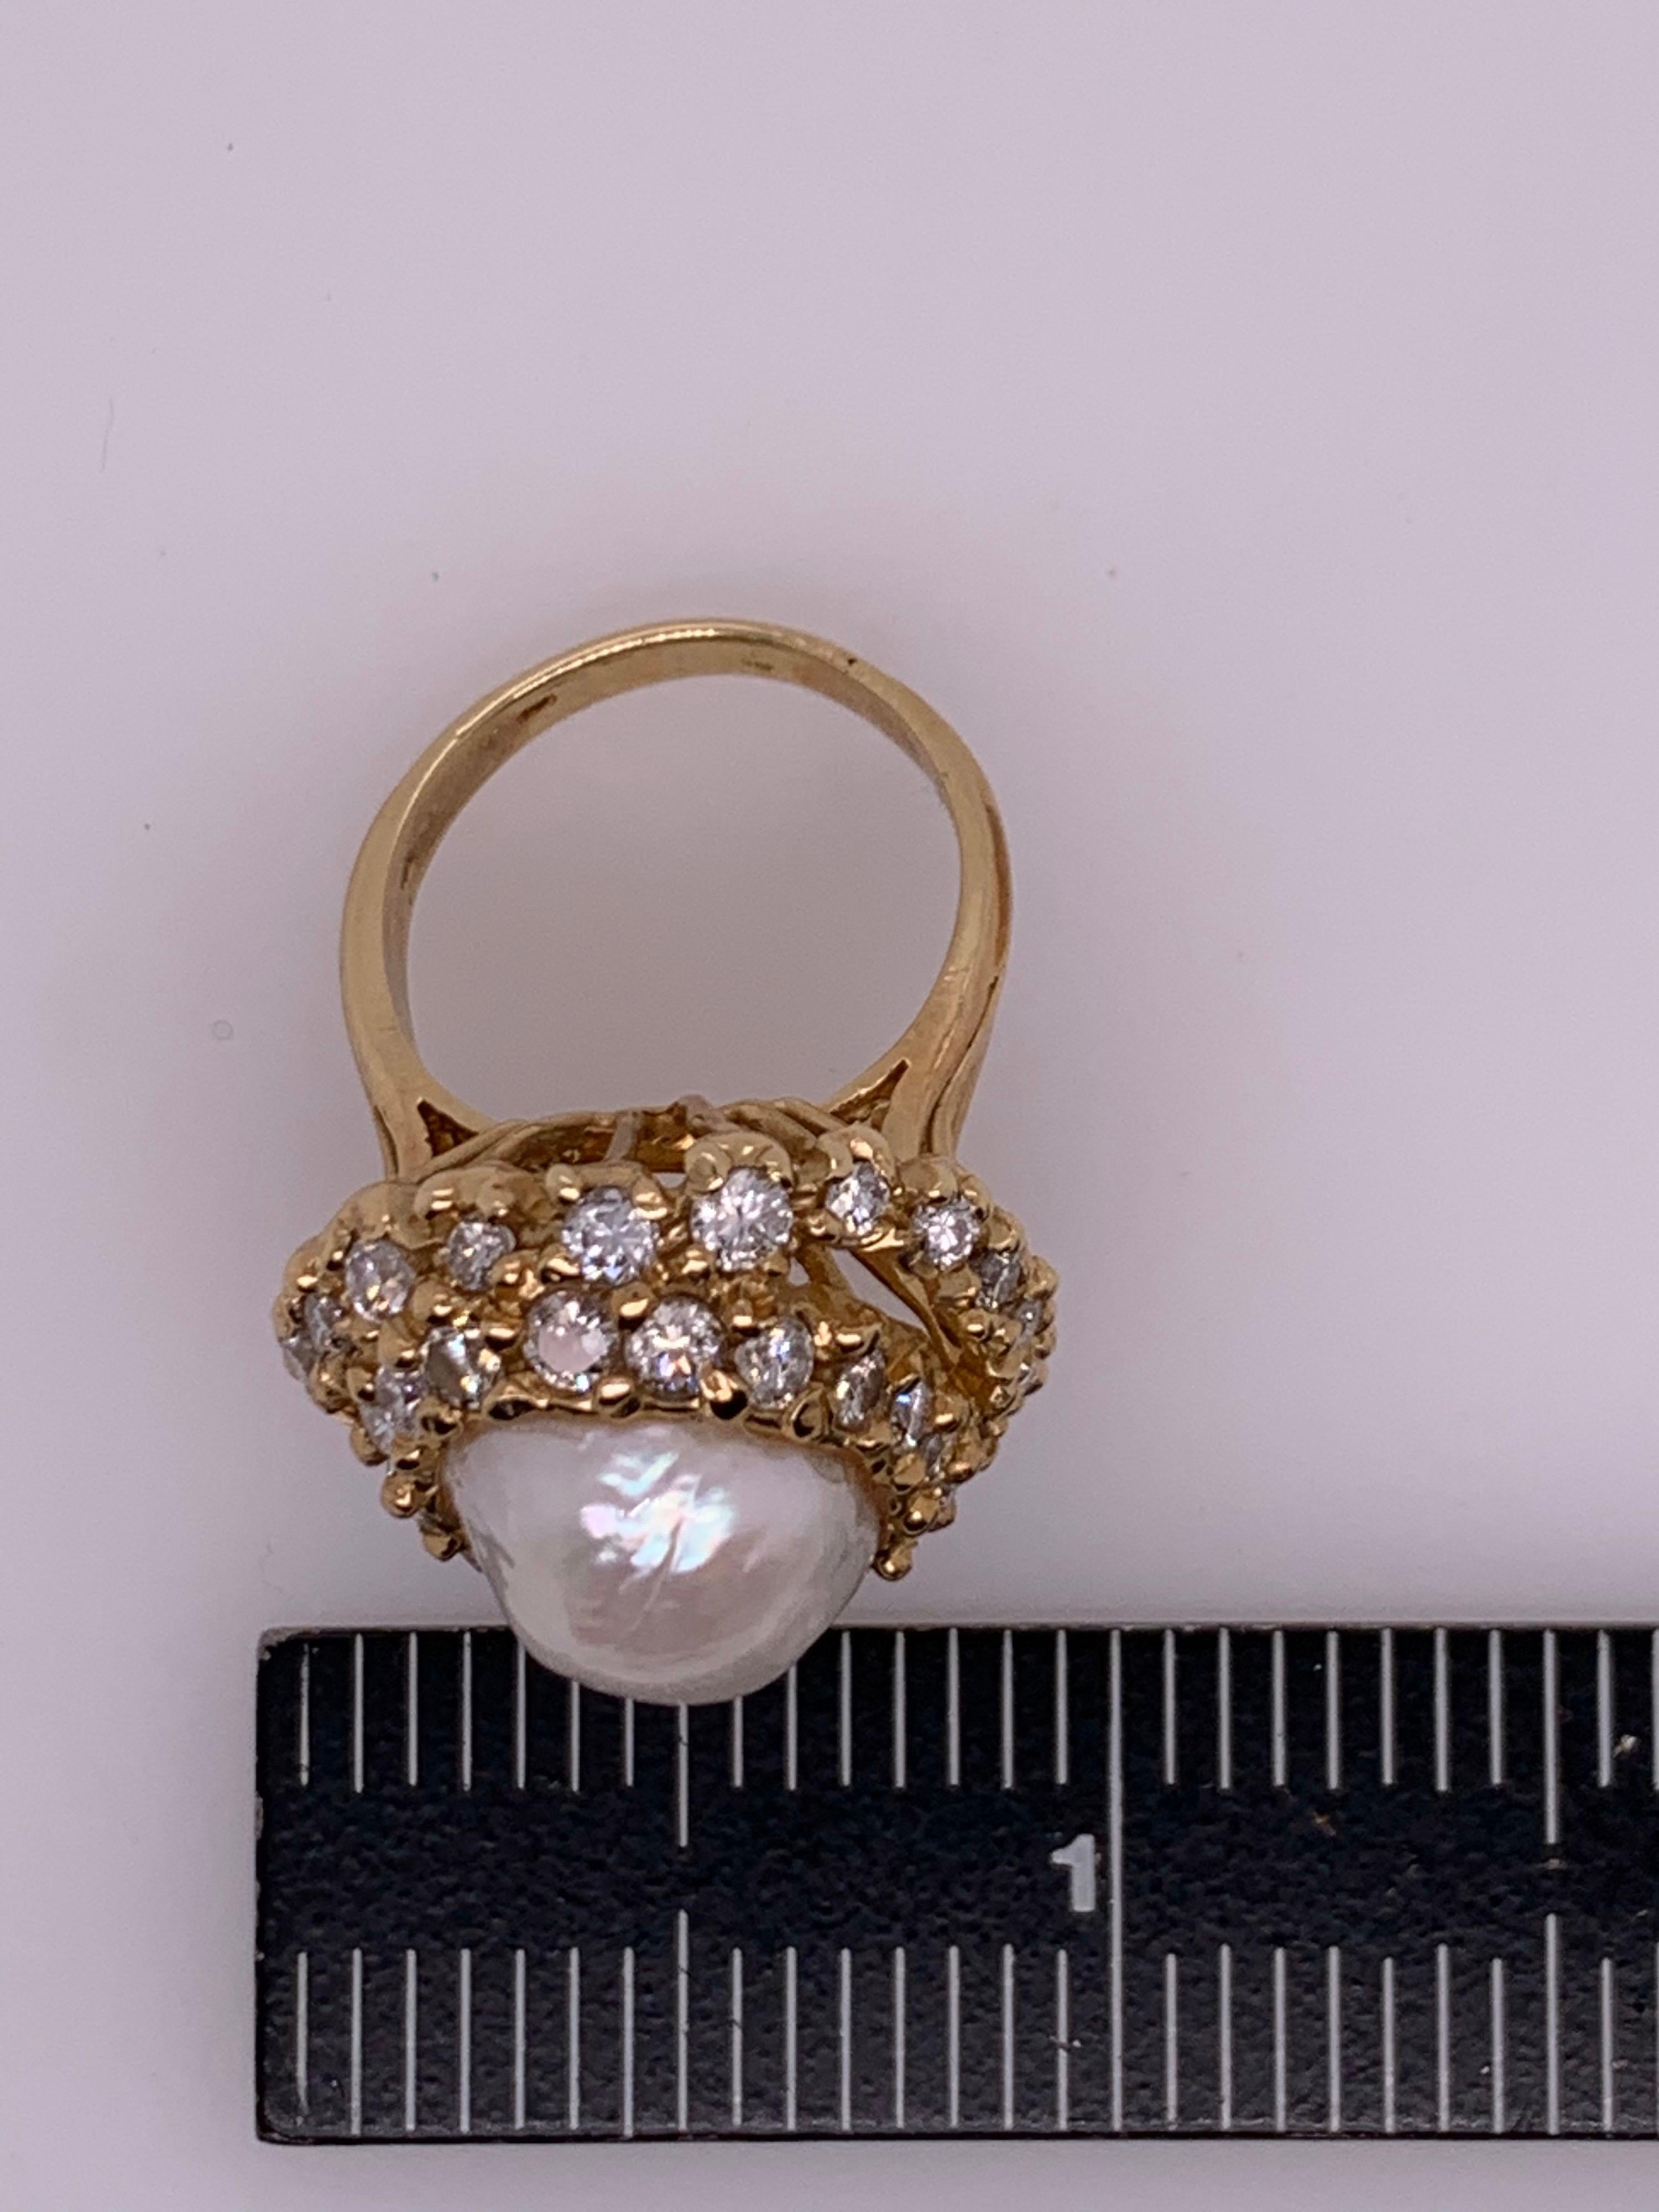 Retro Gold Cocktail Ring 1.8 Carat Natural Colorless Diamond & Pearl, circa 1950 For Sale 6